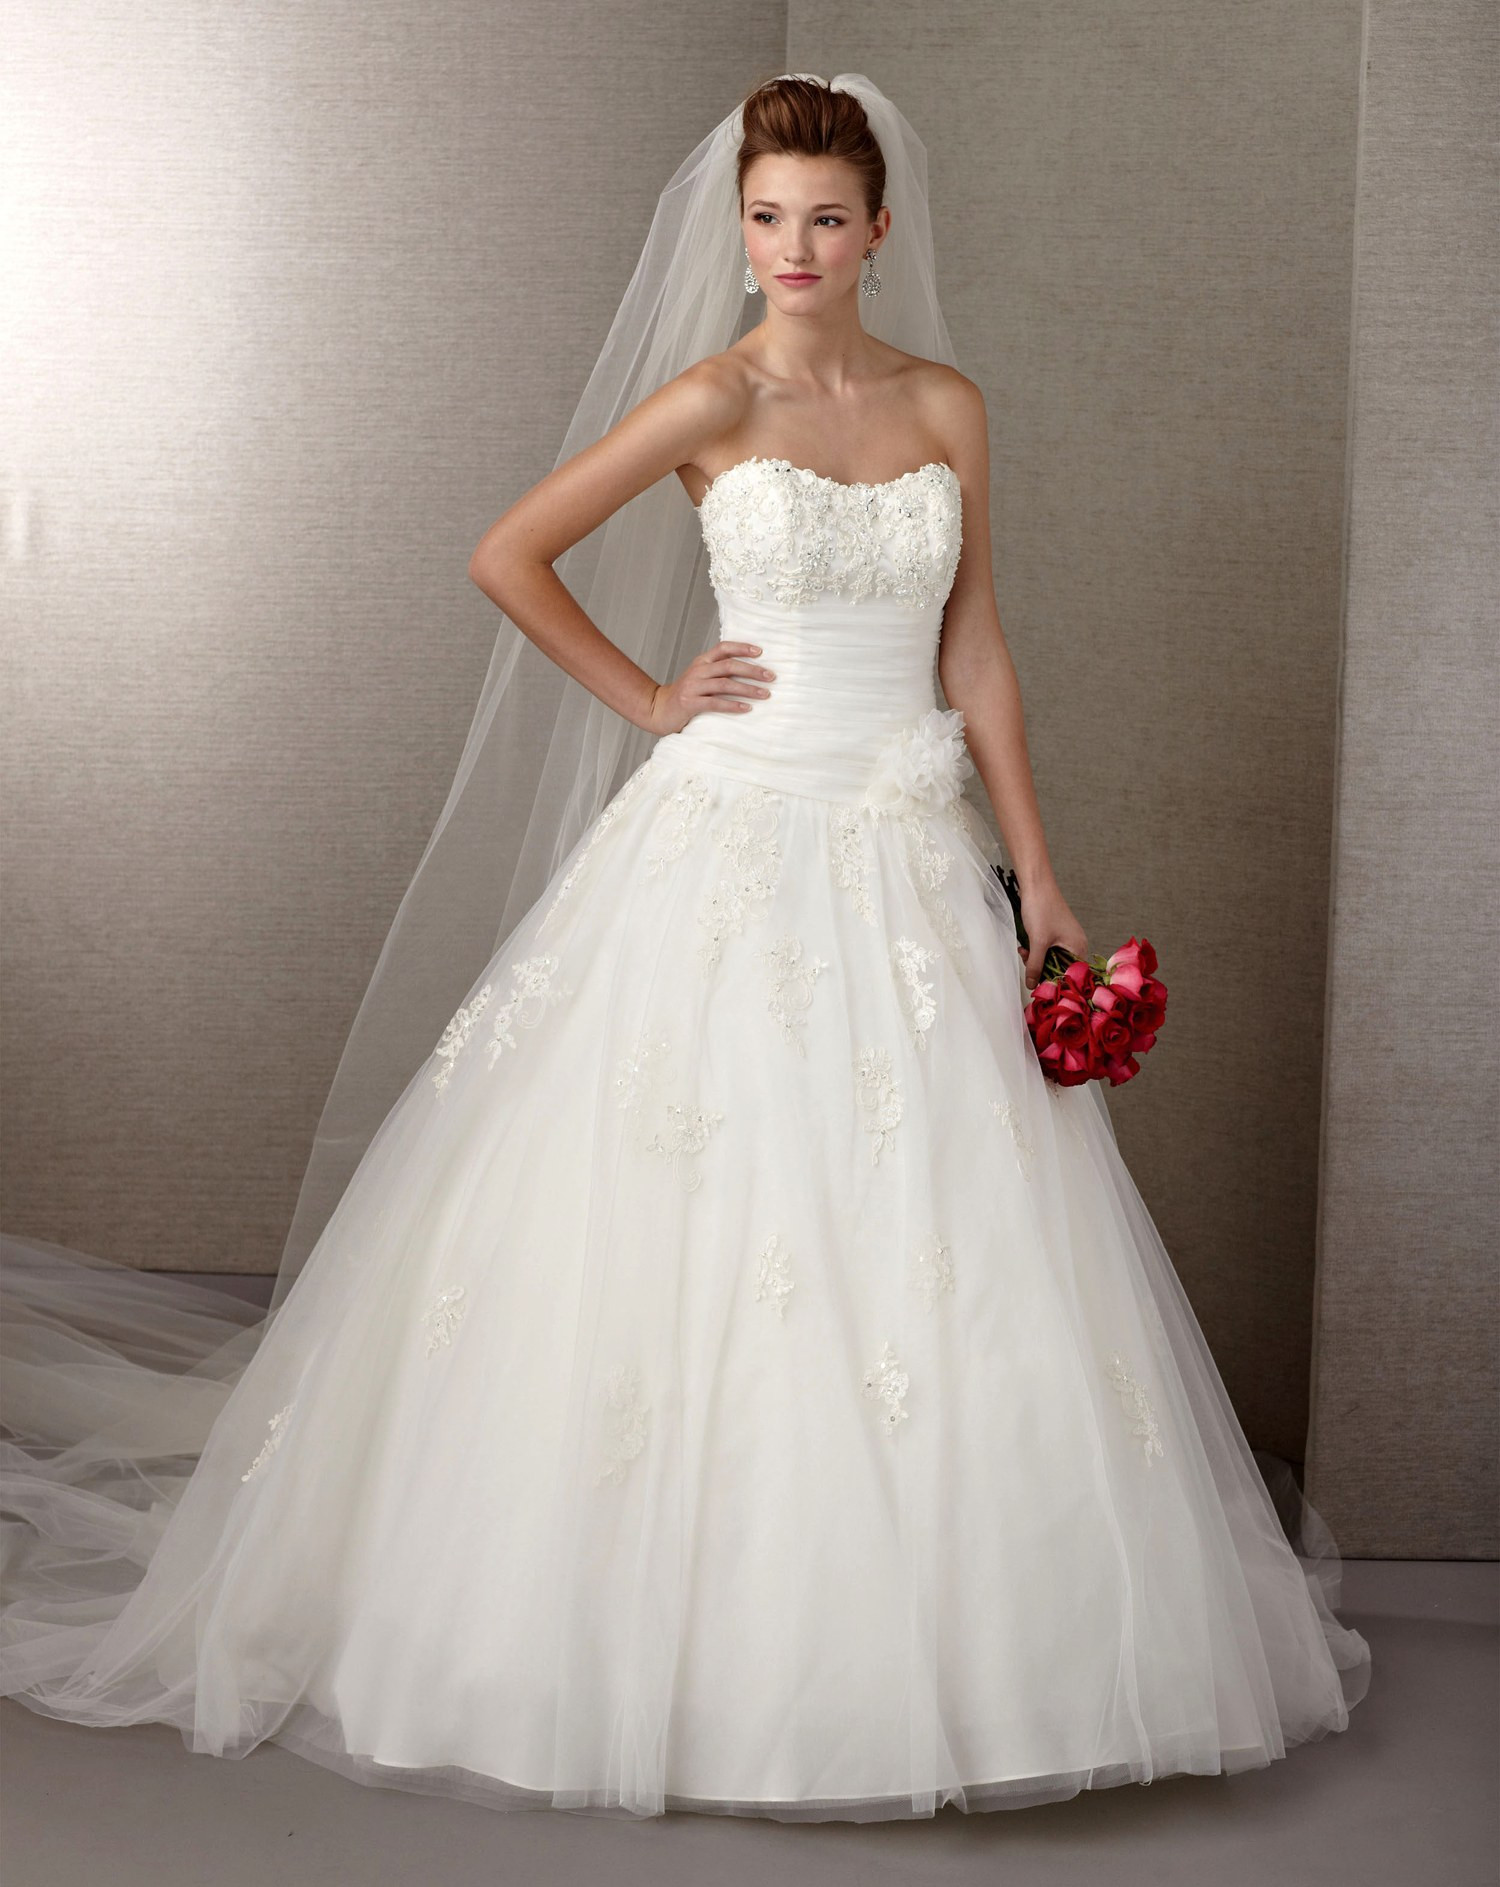 Beautiful Wedding Dress
 21 Gorgeous Wedding Dresses From $100 to $1 000